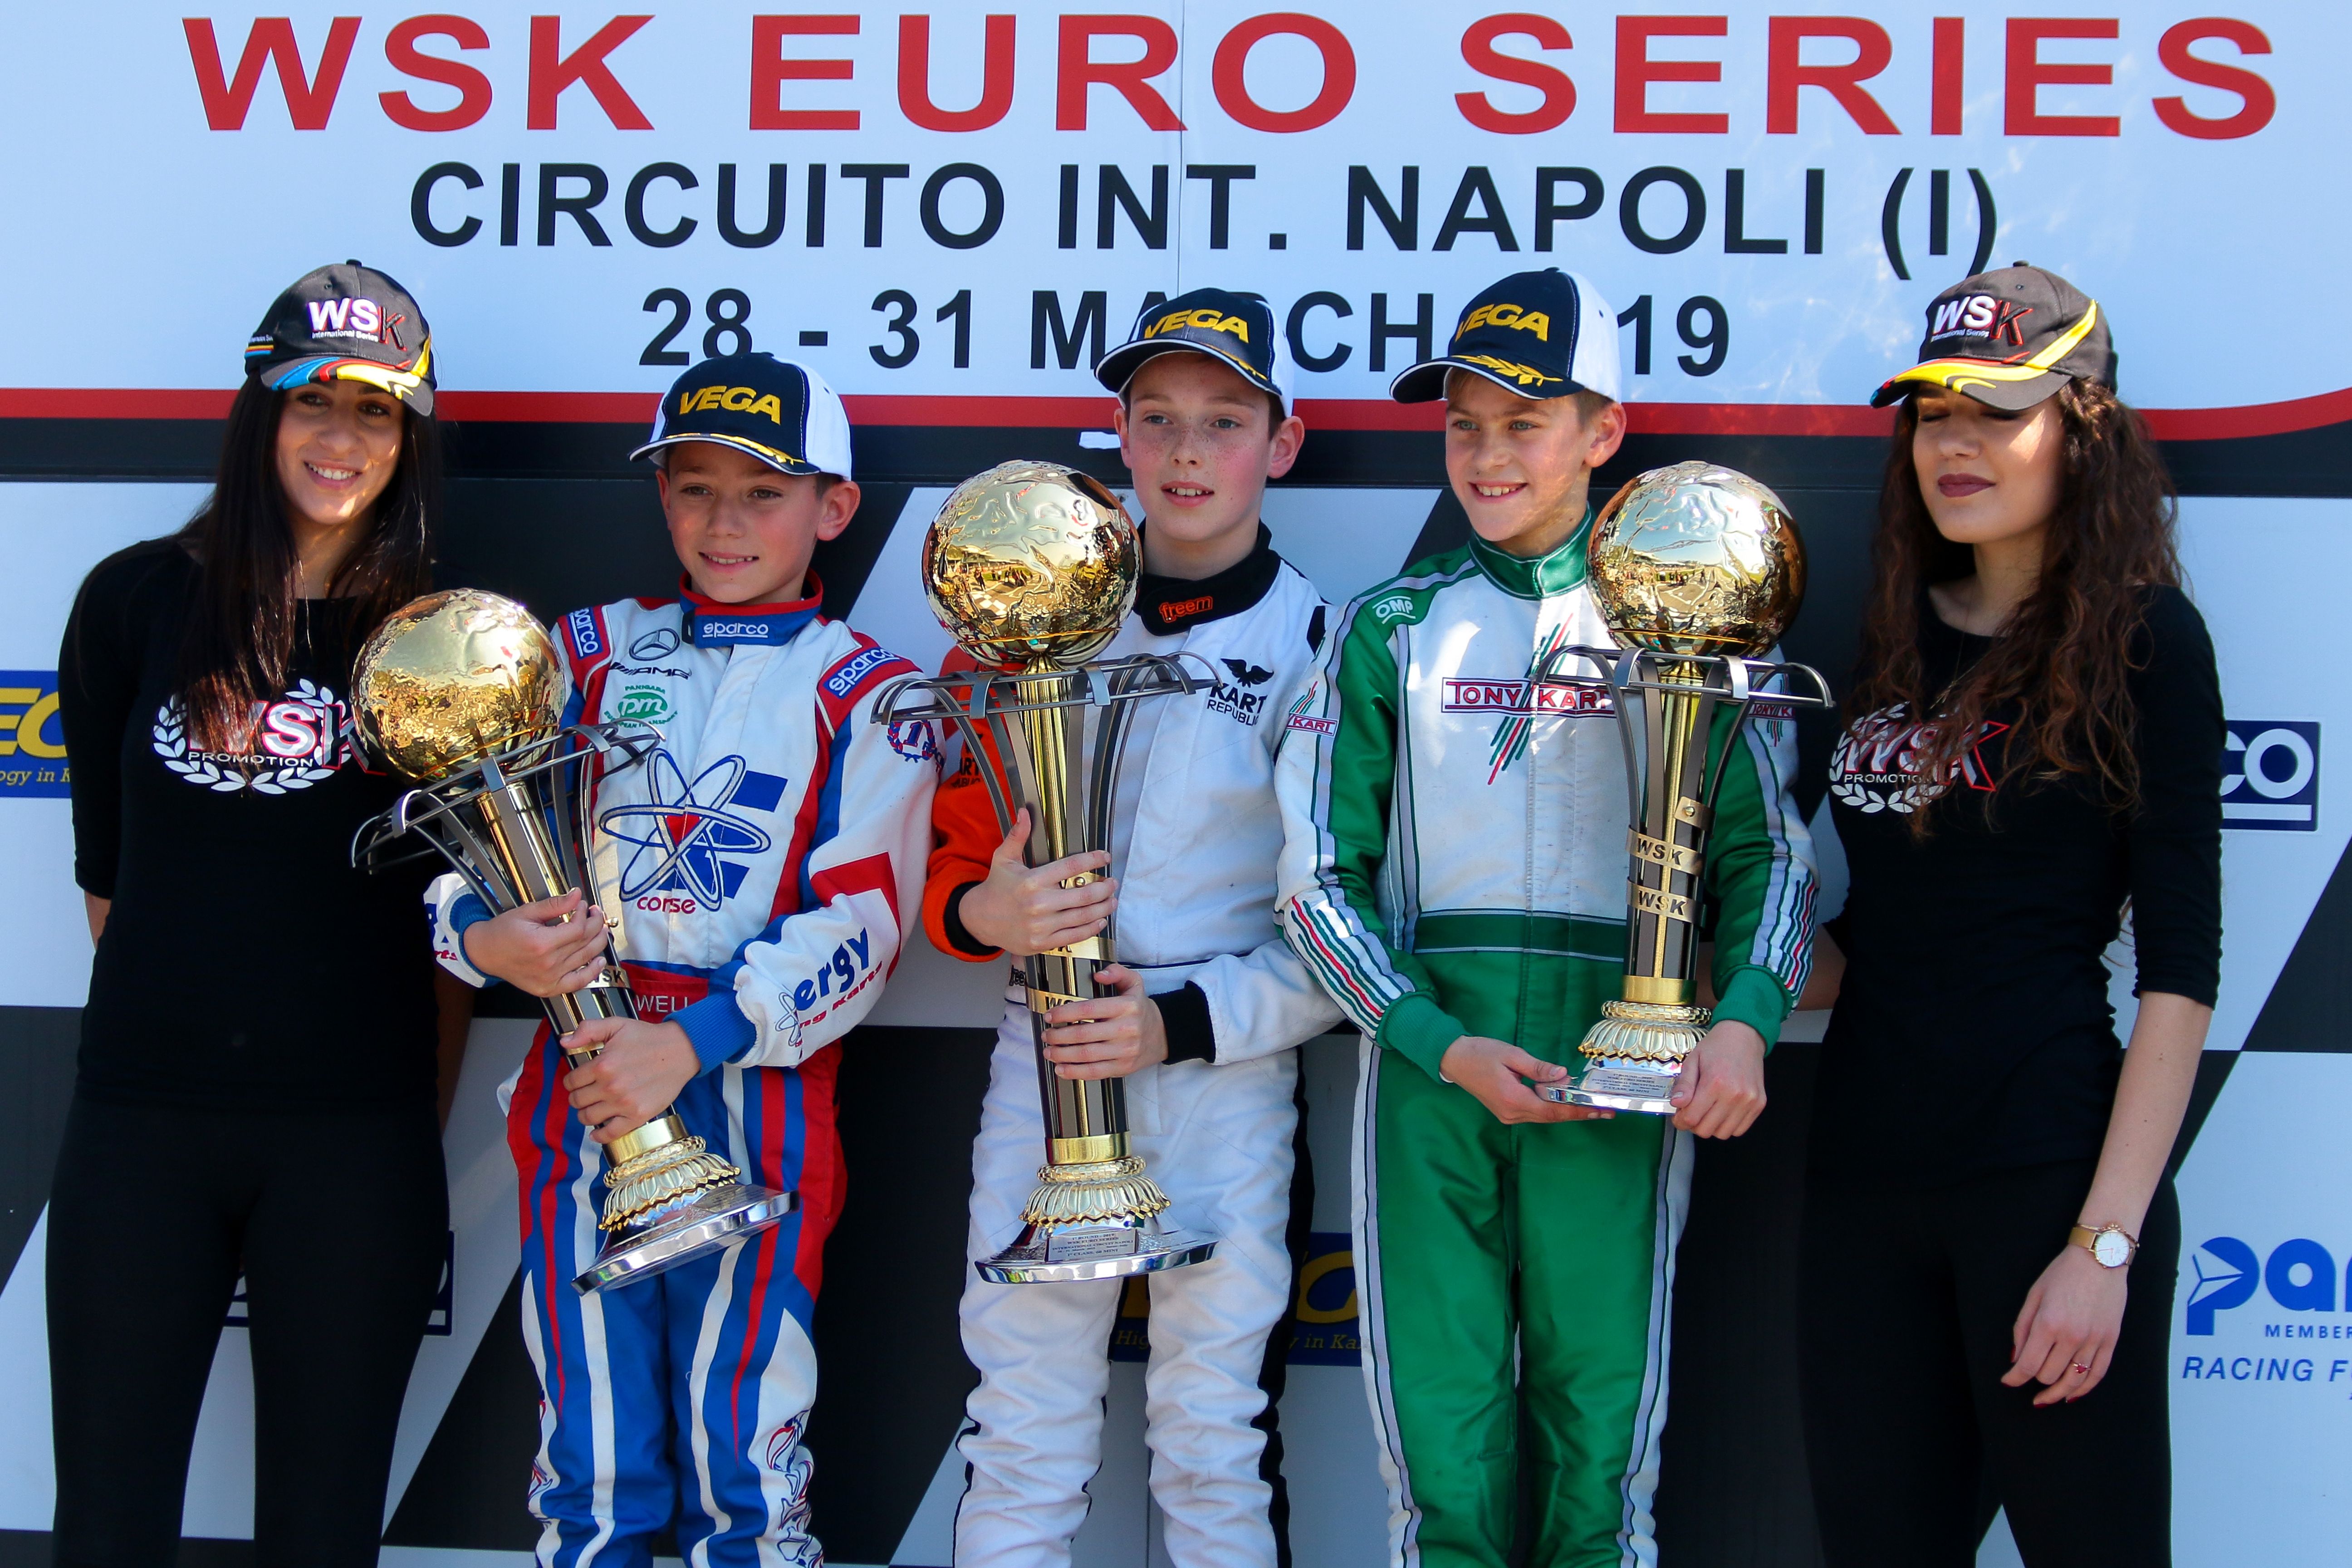 William MacIntyre from Kart Republic (Parolin/TM Racing/Vega) is the winner in the WSK Euro Series at Sarno. Alongside, Alex Powell from Energy and Andrea Filaferro from Newman